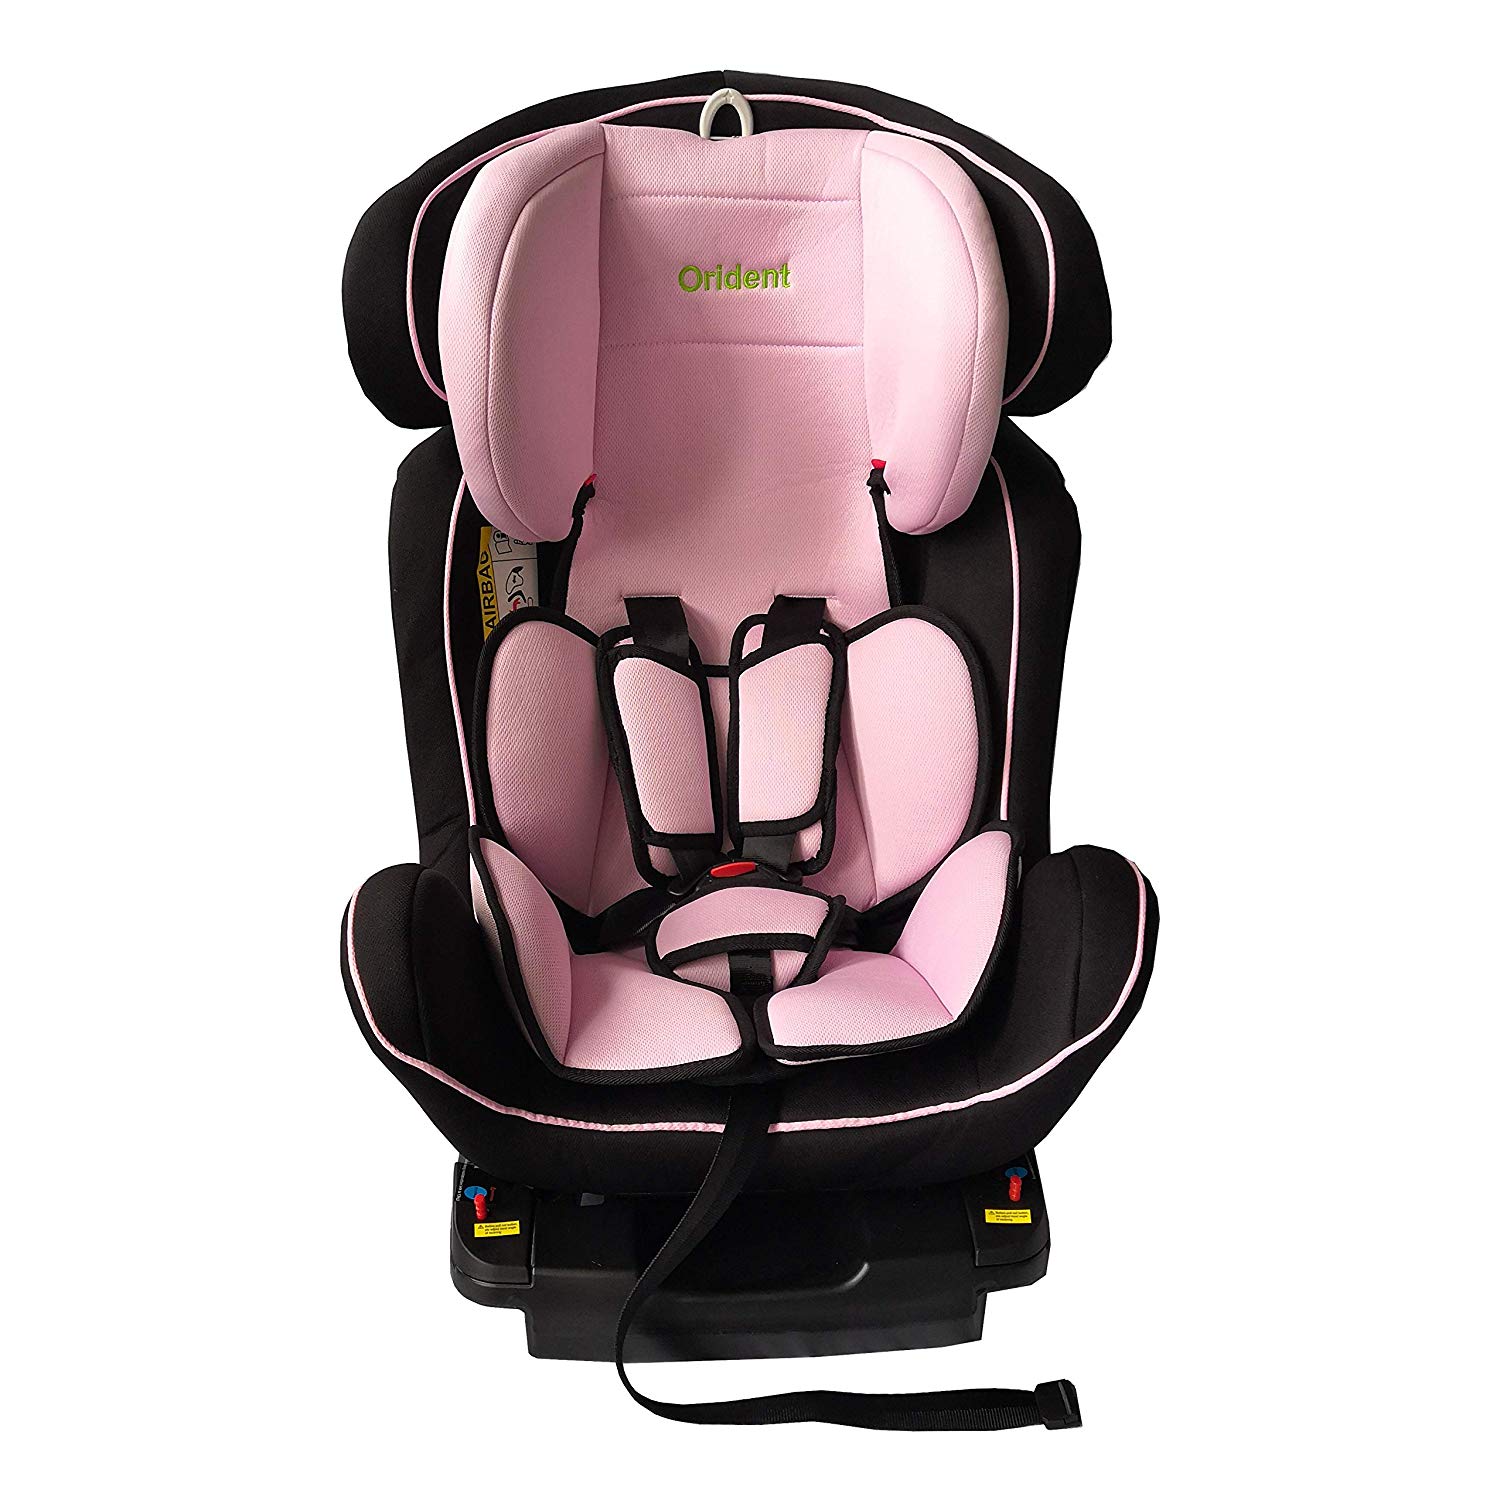 Orident Isofix KX Car Seat 0-36 kg Group 0+, 1, 2, 3 in accordance with ECE R44/04 Standard + Isofix (Pink)